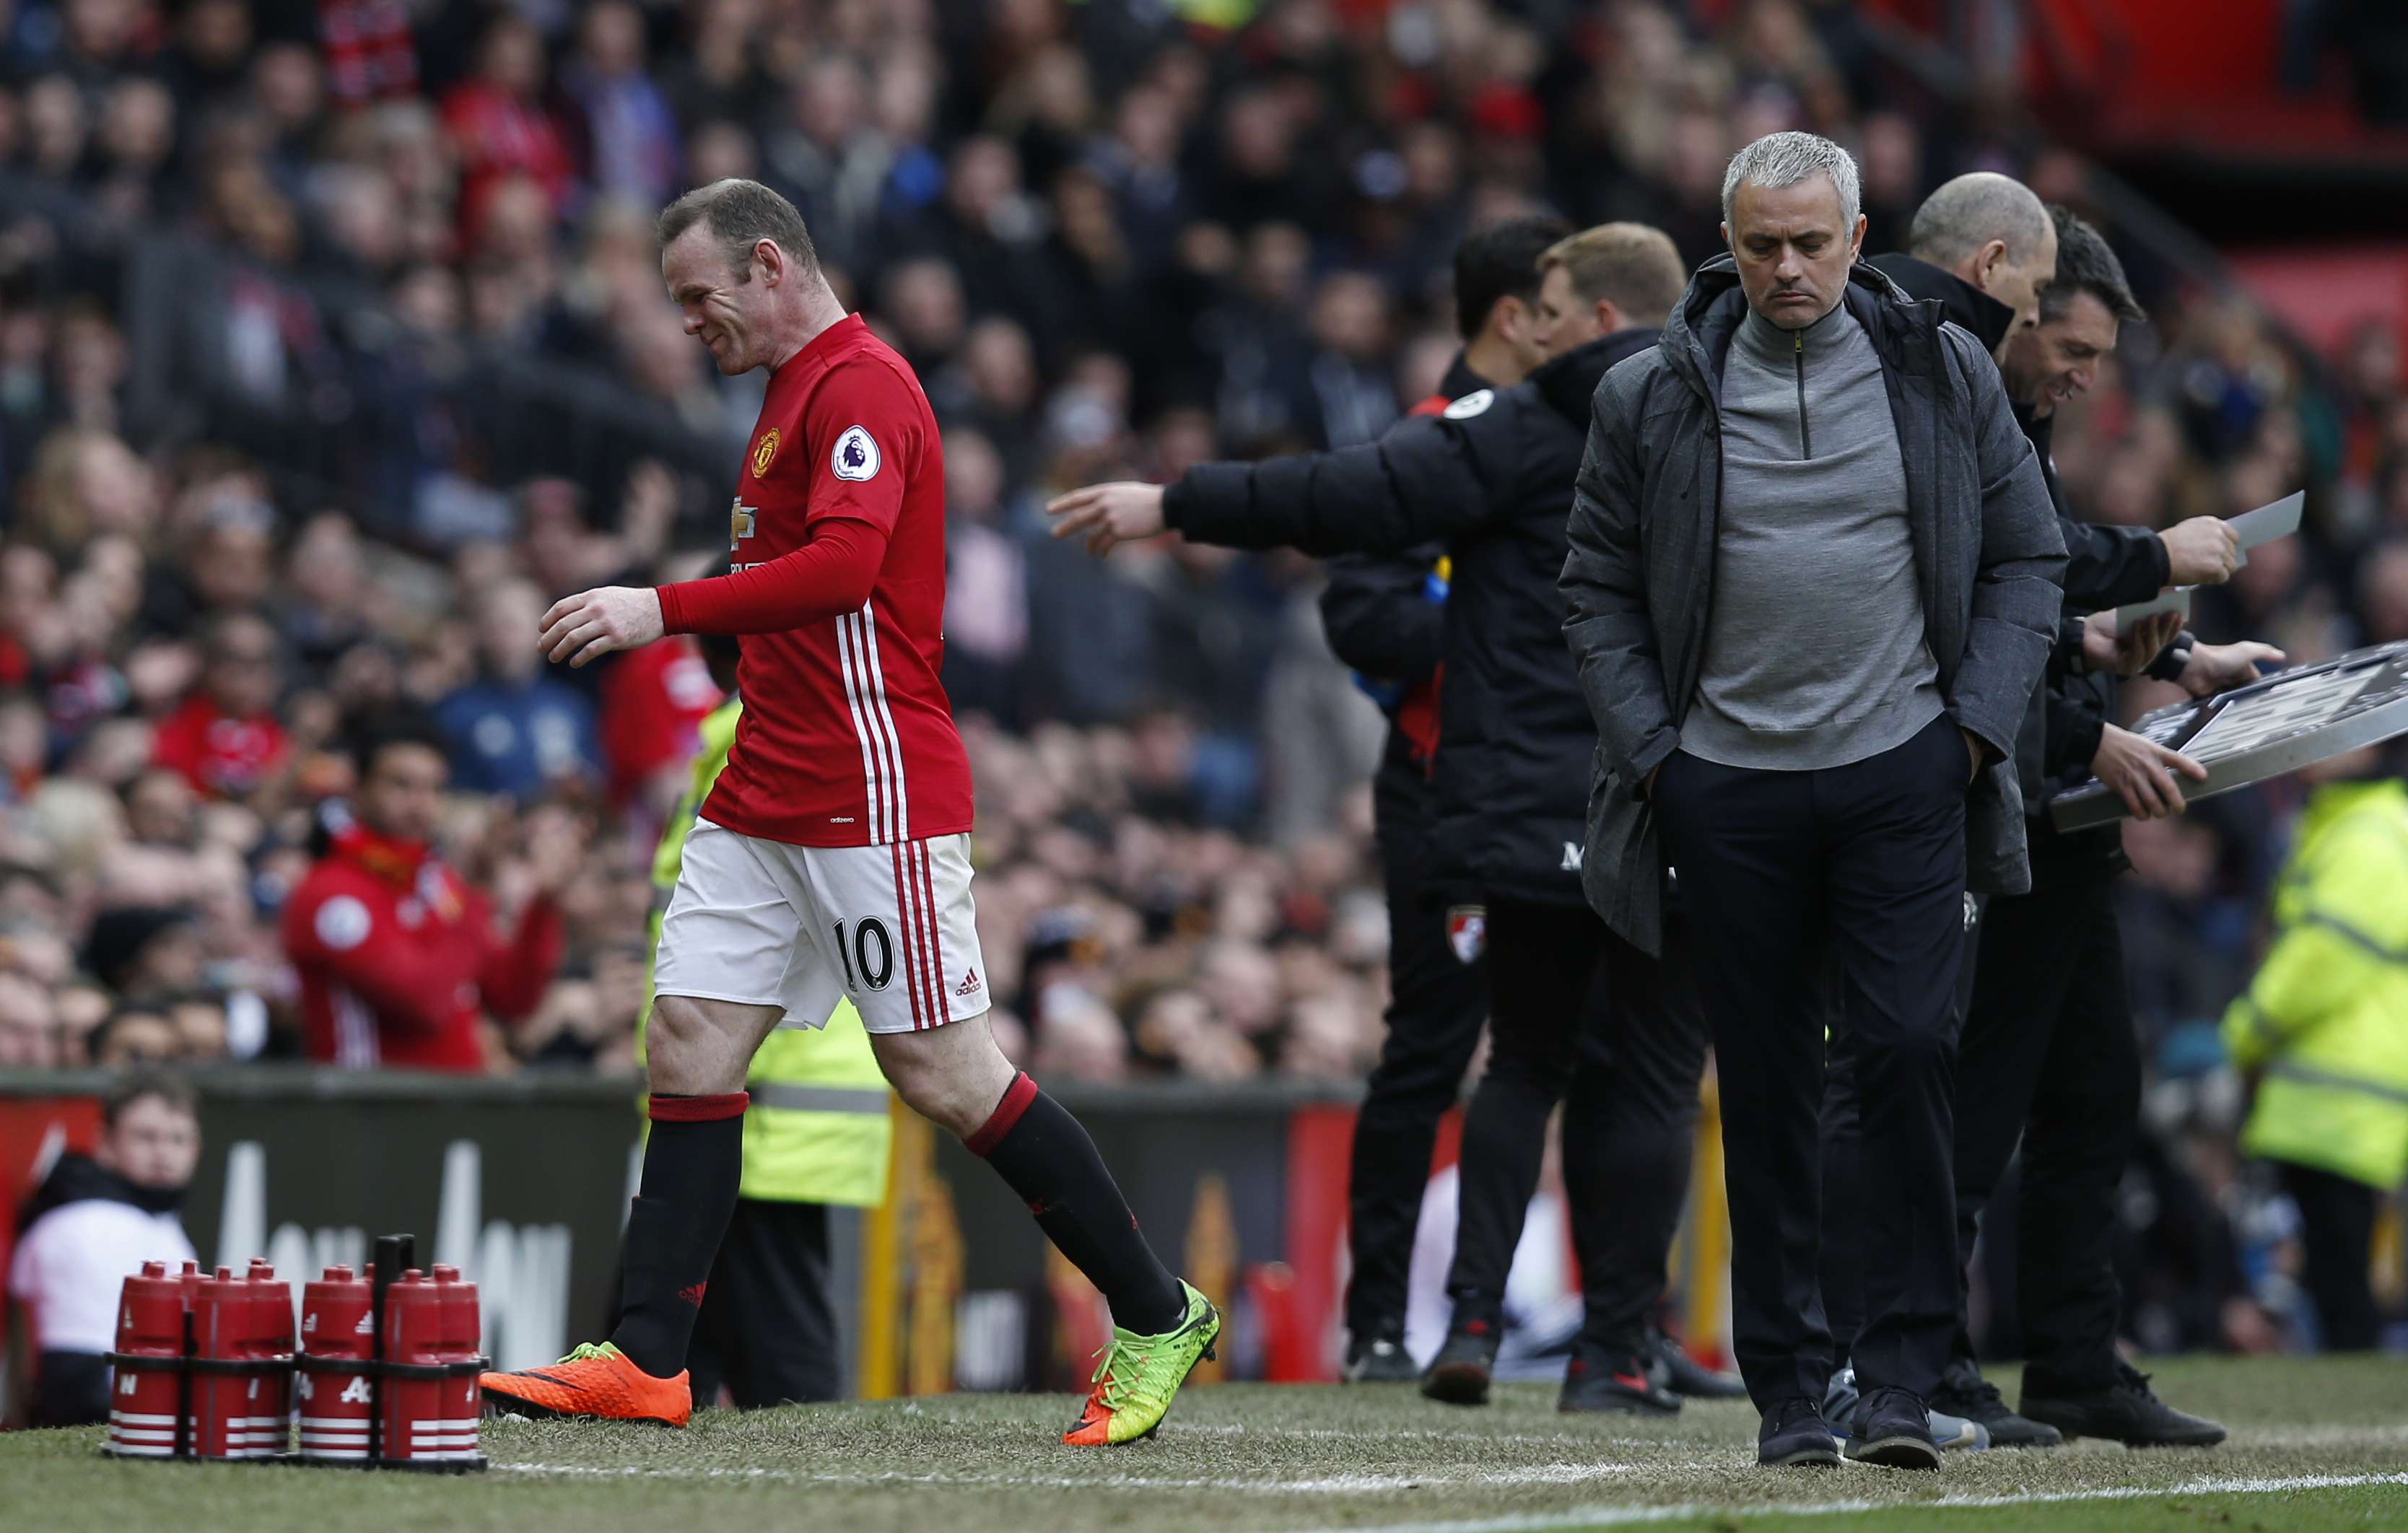 England captain Wayne Rooney has been dropped from the England squad for the first time. Photo: Reuters